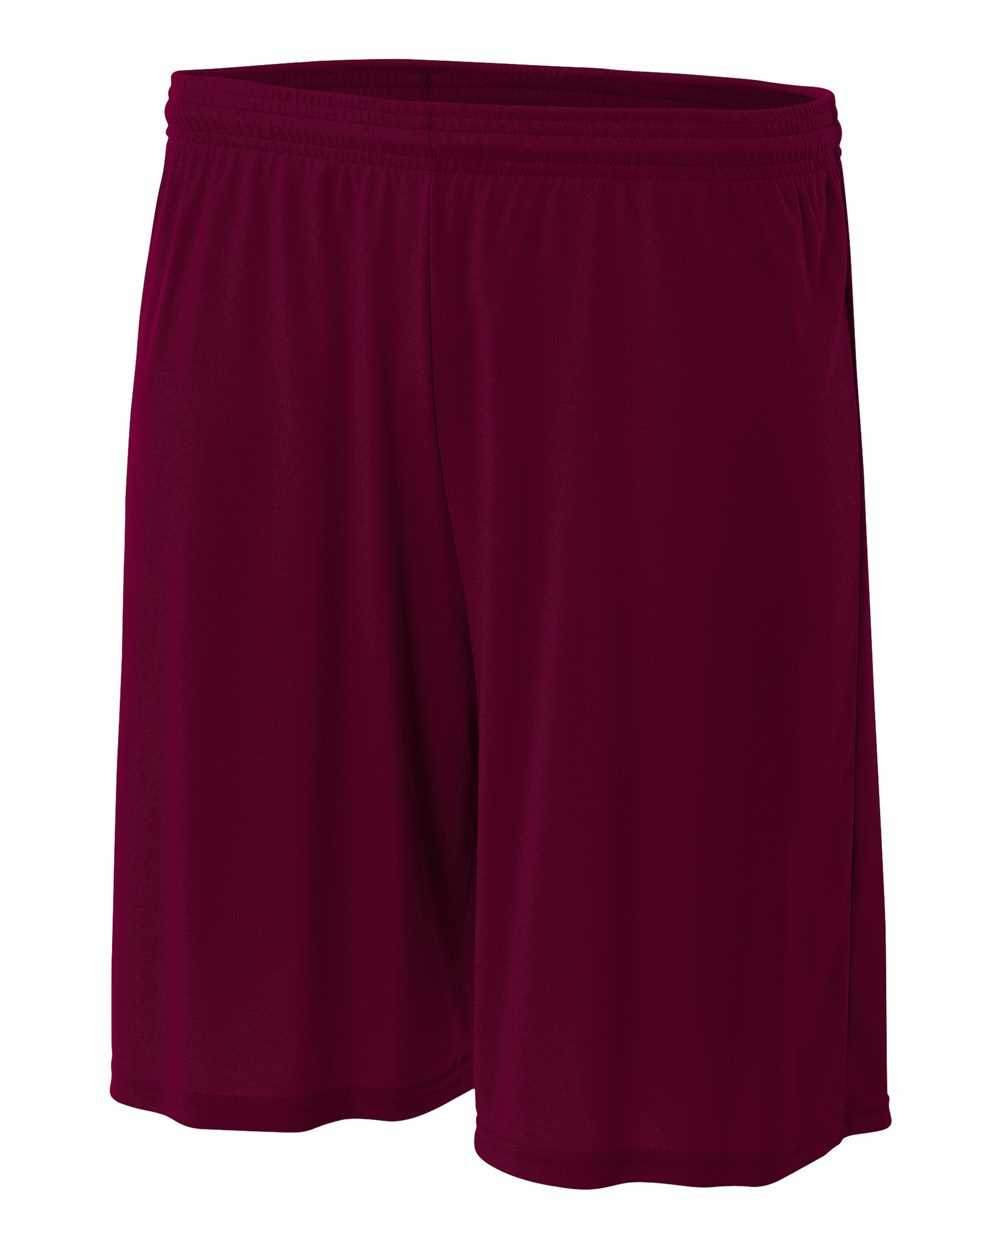 A4 N5283 9" Cooling Performance Short - Maroon - HIT a Double